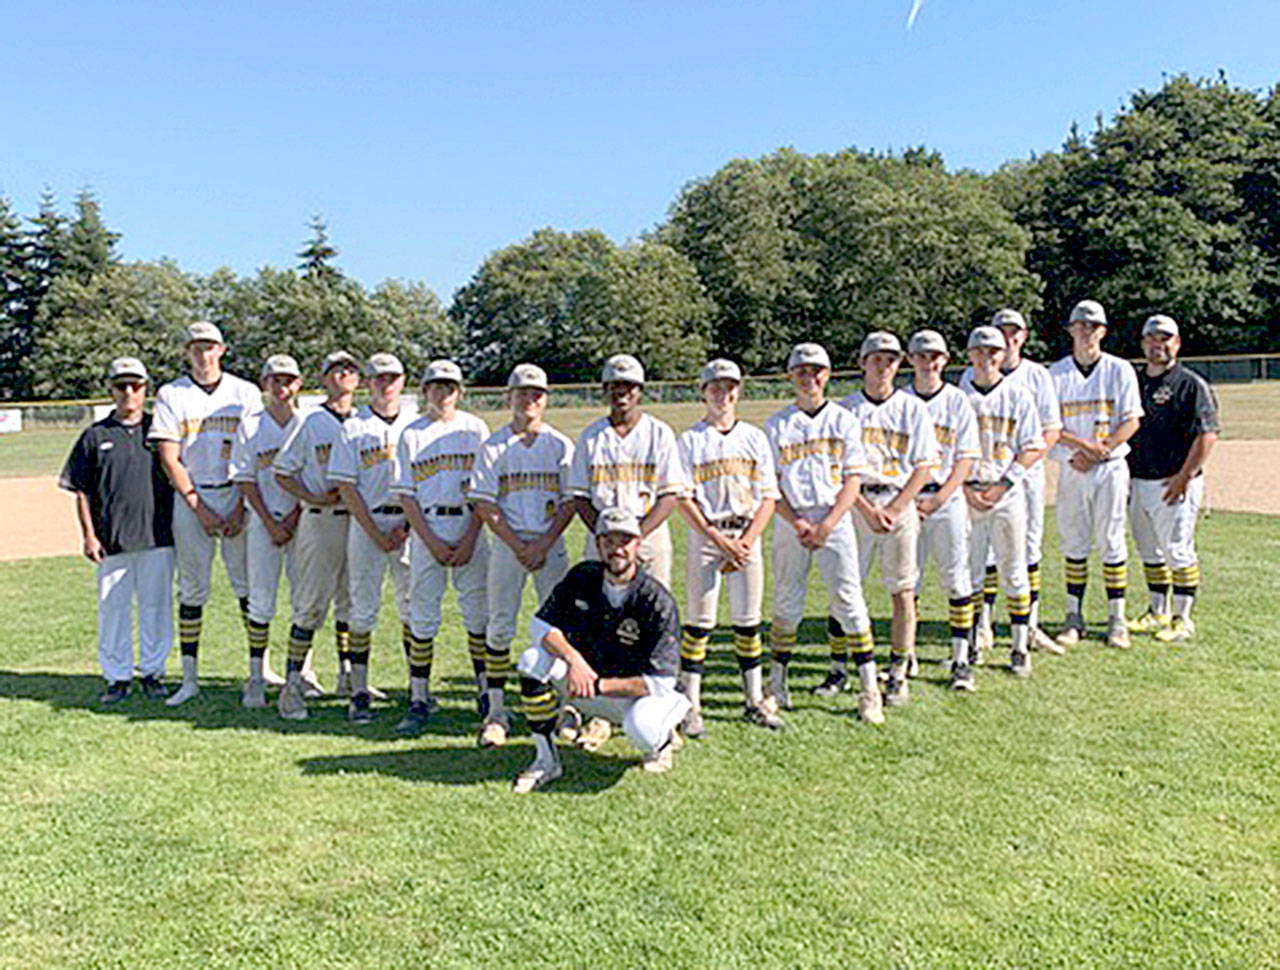 The Olympic Crosscutters qualified for the American Legion state A tournament this weekend with a weekend sweep over Stanwood. From left, assistant coach Anthony Koeninger, John Vaara, Trenton Indelicato, Colton Reed, Elijah Flodstrom, Parker Nickerson, Dalton Kilmer, assistant coach Nick Johnston, Elisha Dujue, Zane Glassock, Kole Acker, Hunter Robinson, Kellen Garcelon, Tanner Woodley, Nathan Seelye, Logan Urvina and head coach John Qualls.